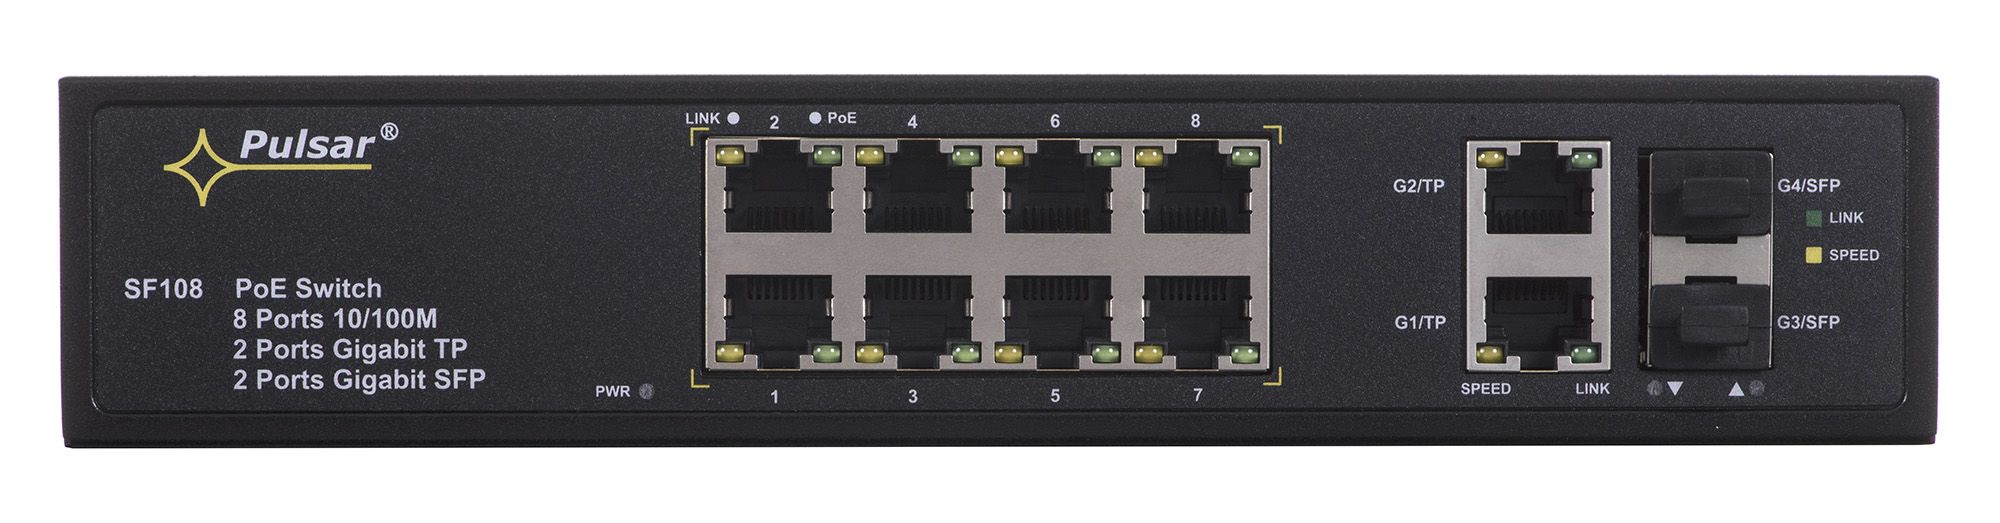 PULSAR SF108 network switch Managed Fast Ethernet (10/100) Power over Ethernet (PoE) Black_8